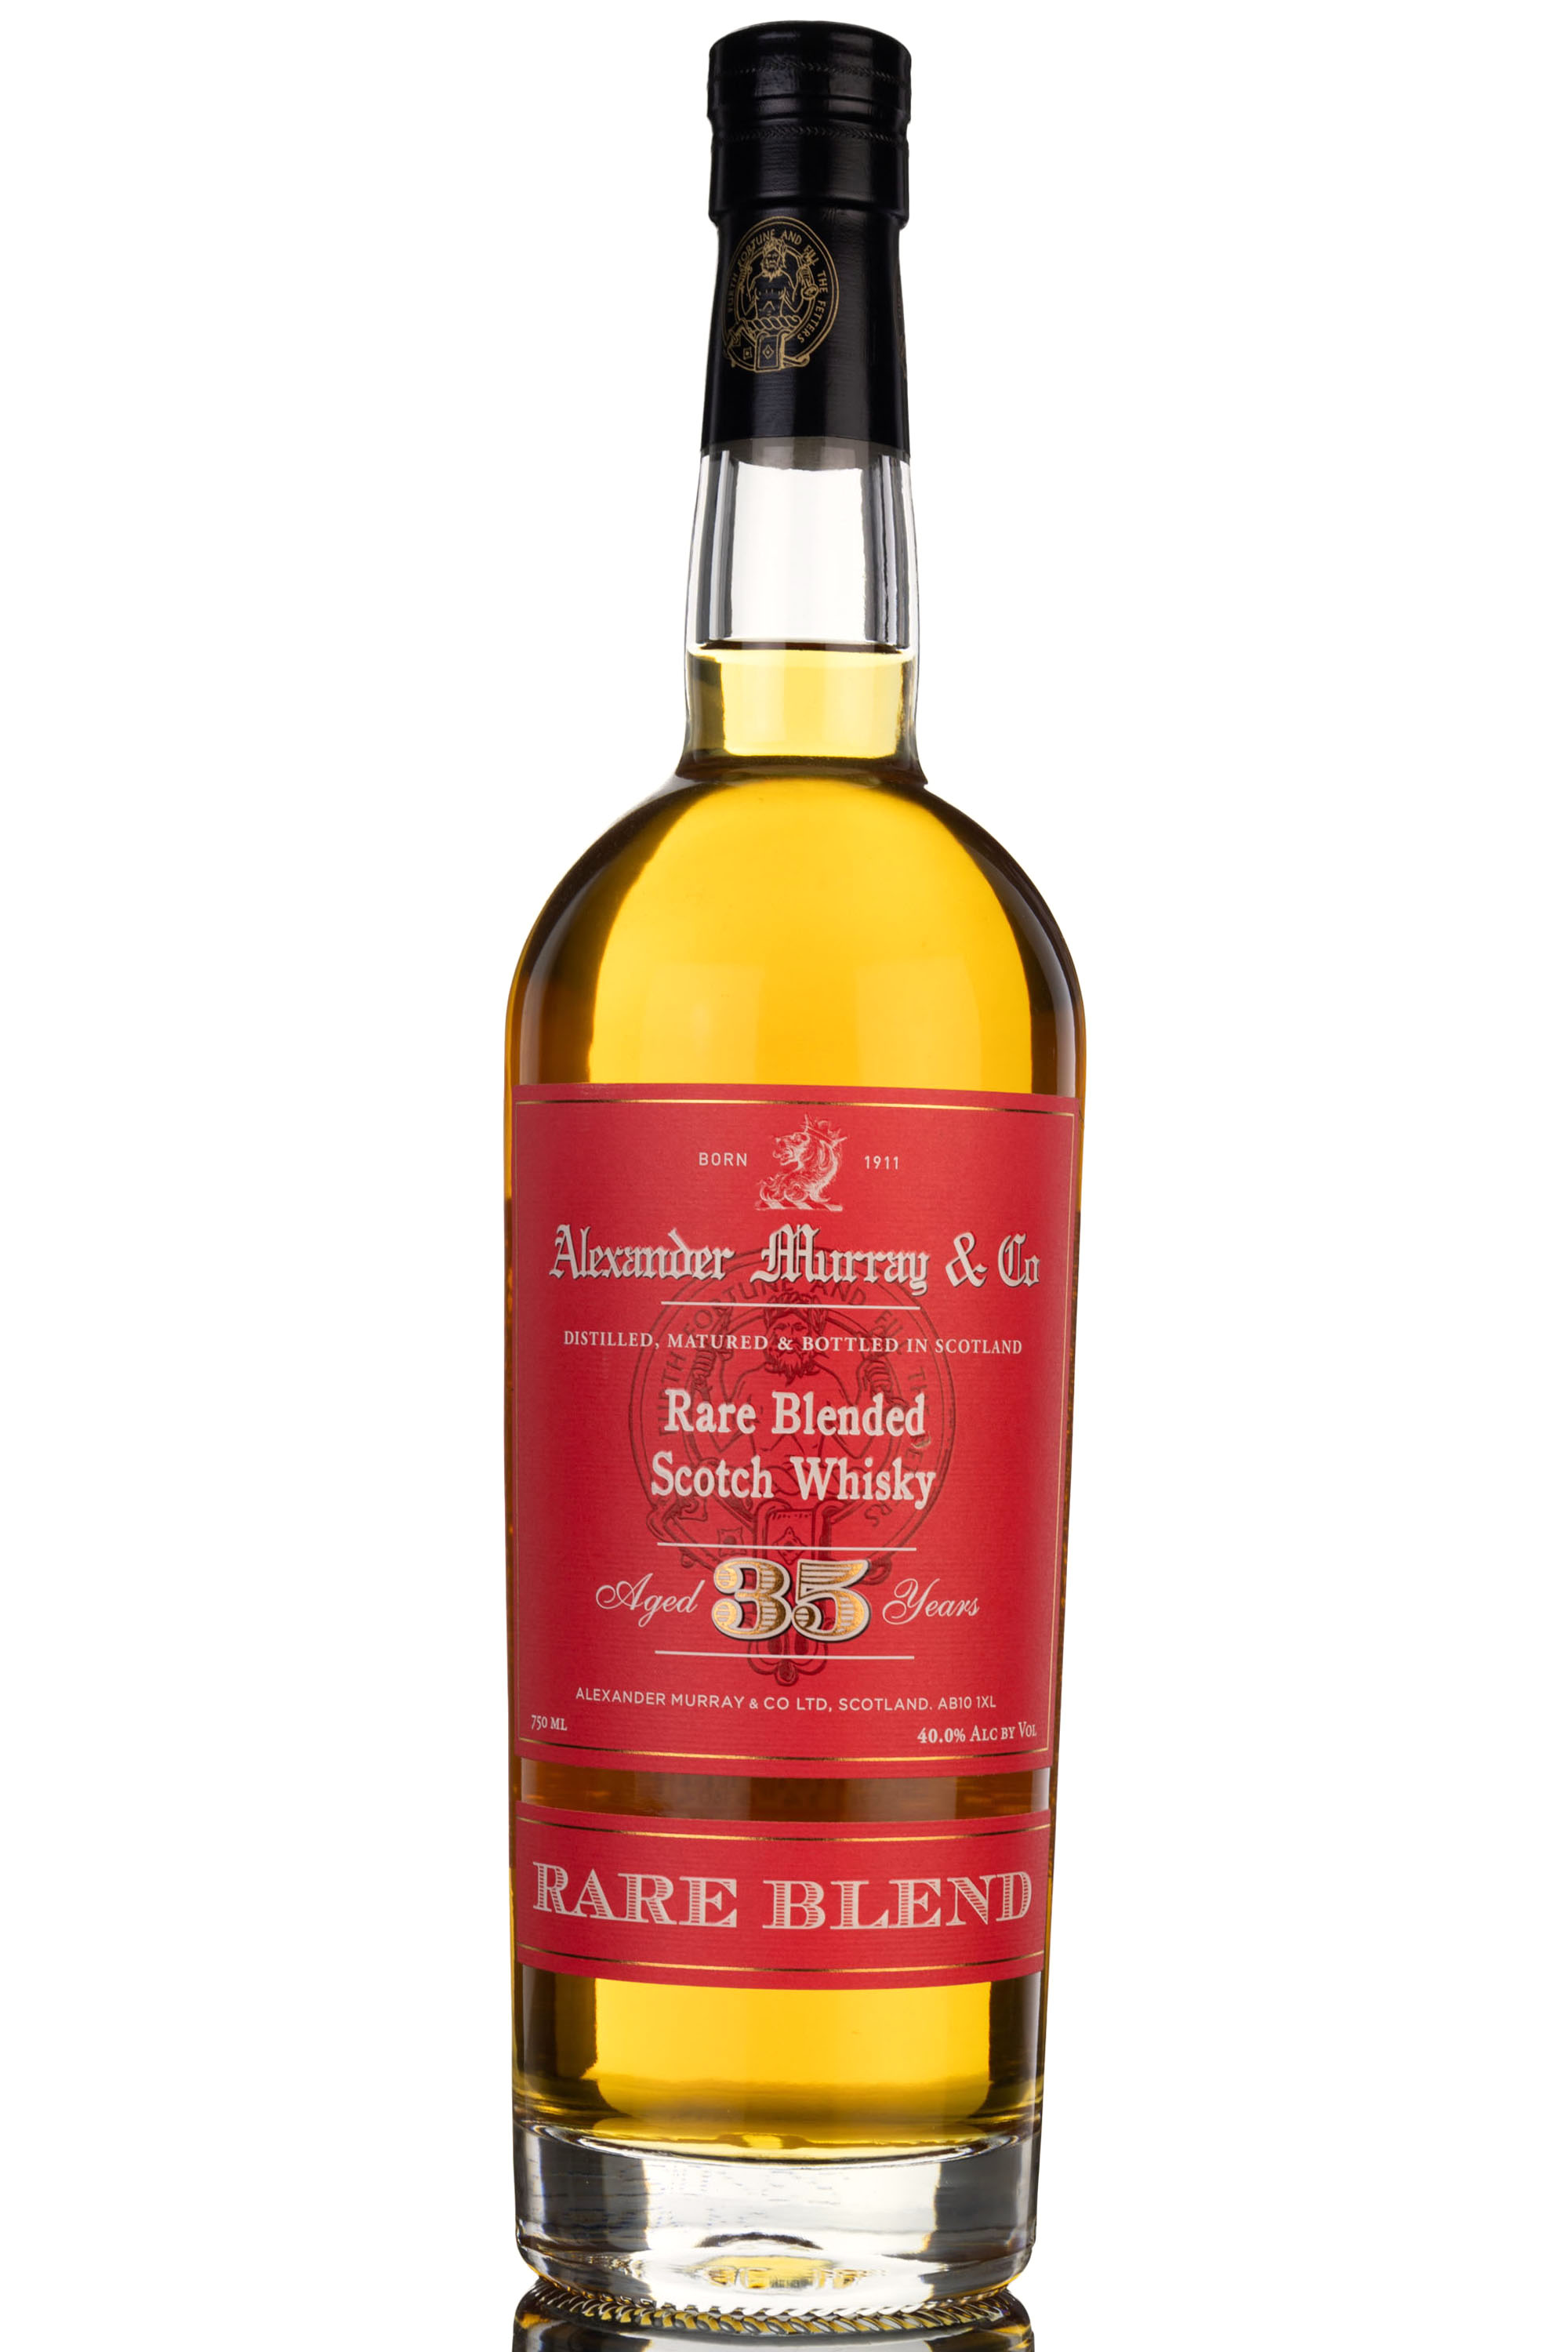 Rare Blended Scotch Whisky 35 Year Old - Alexander Murray